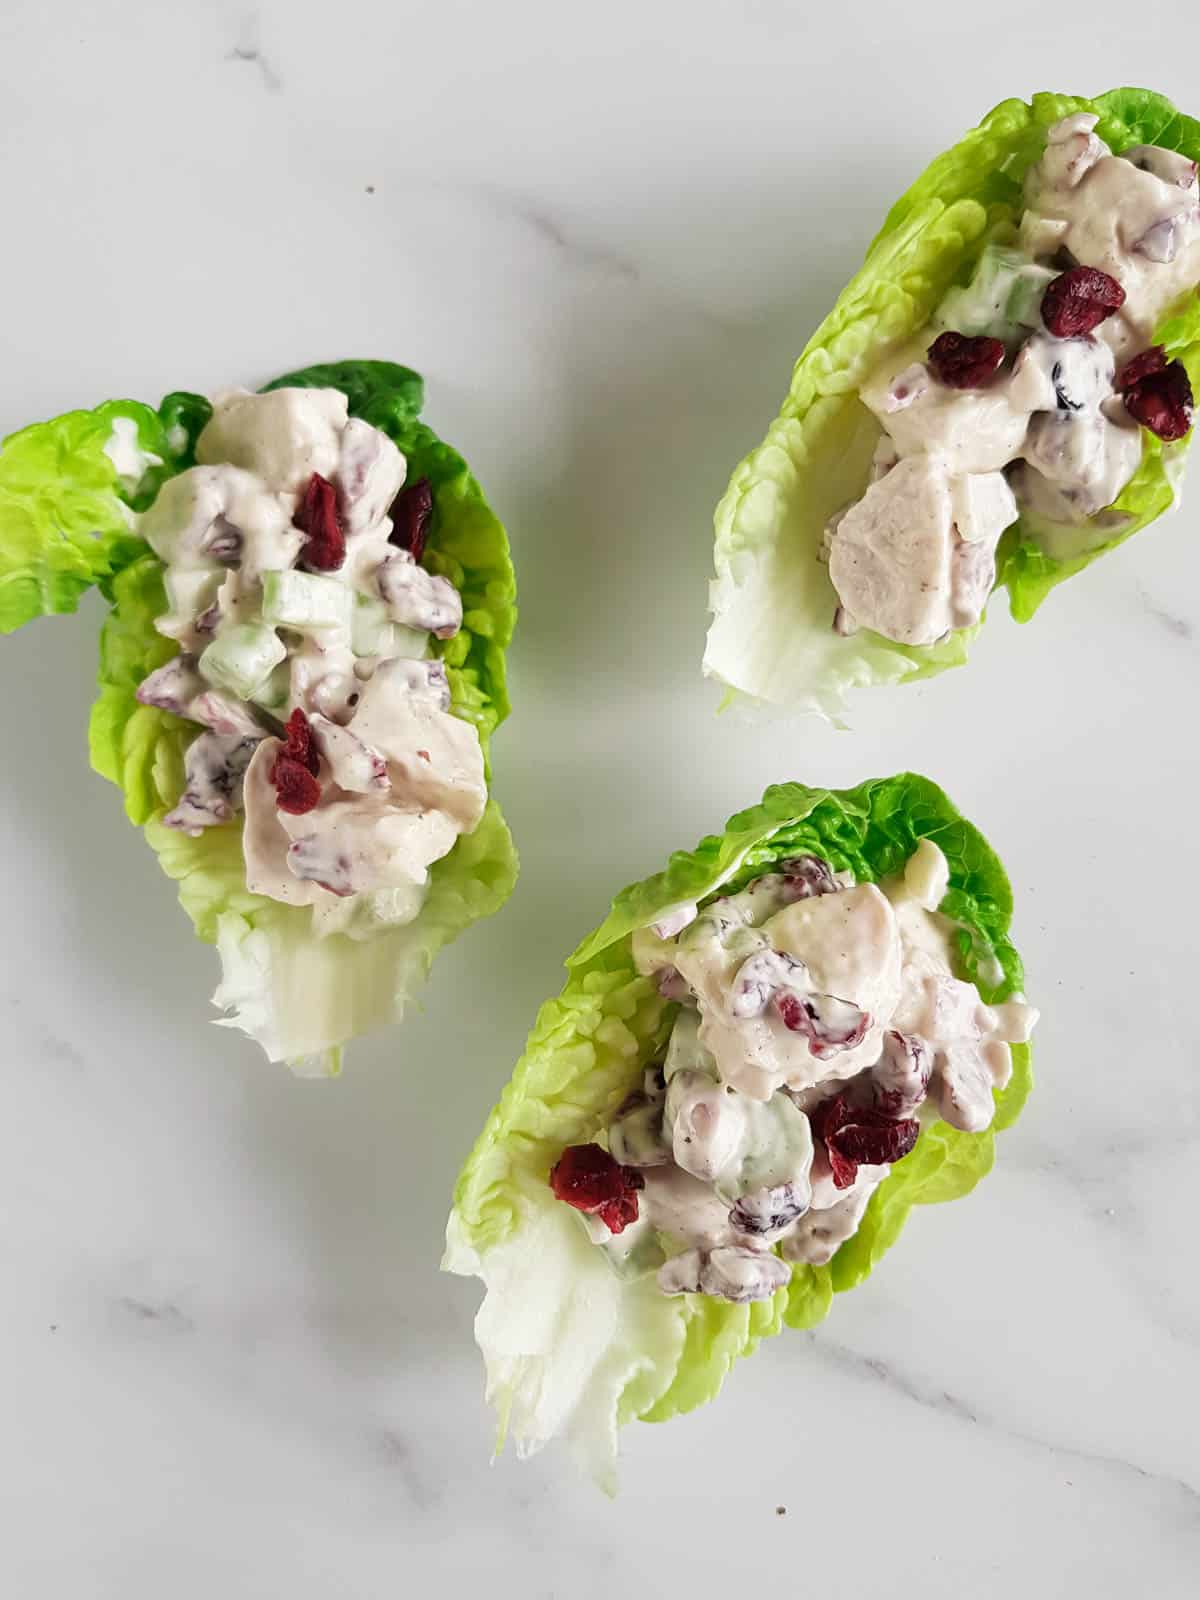 Lettuce wraps with cranberry chicken salad.